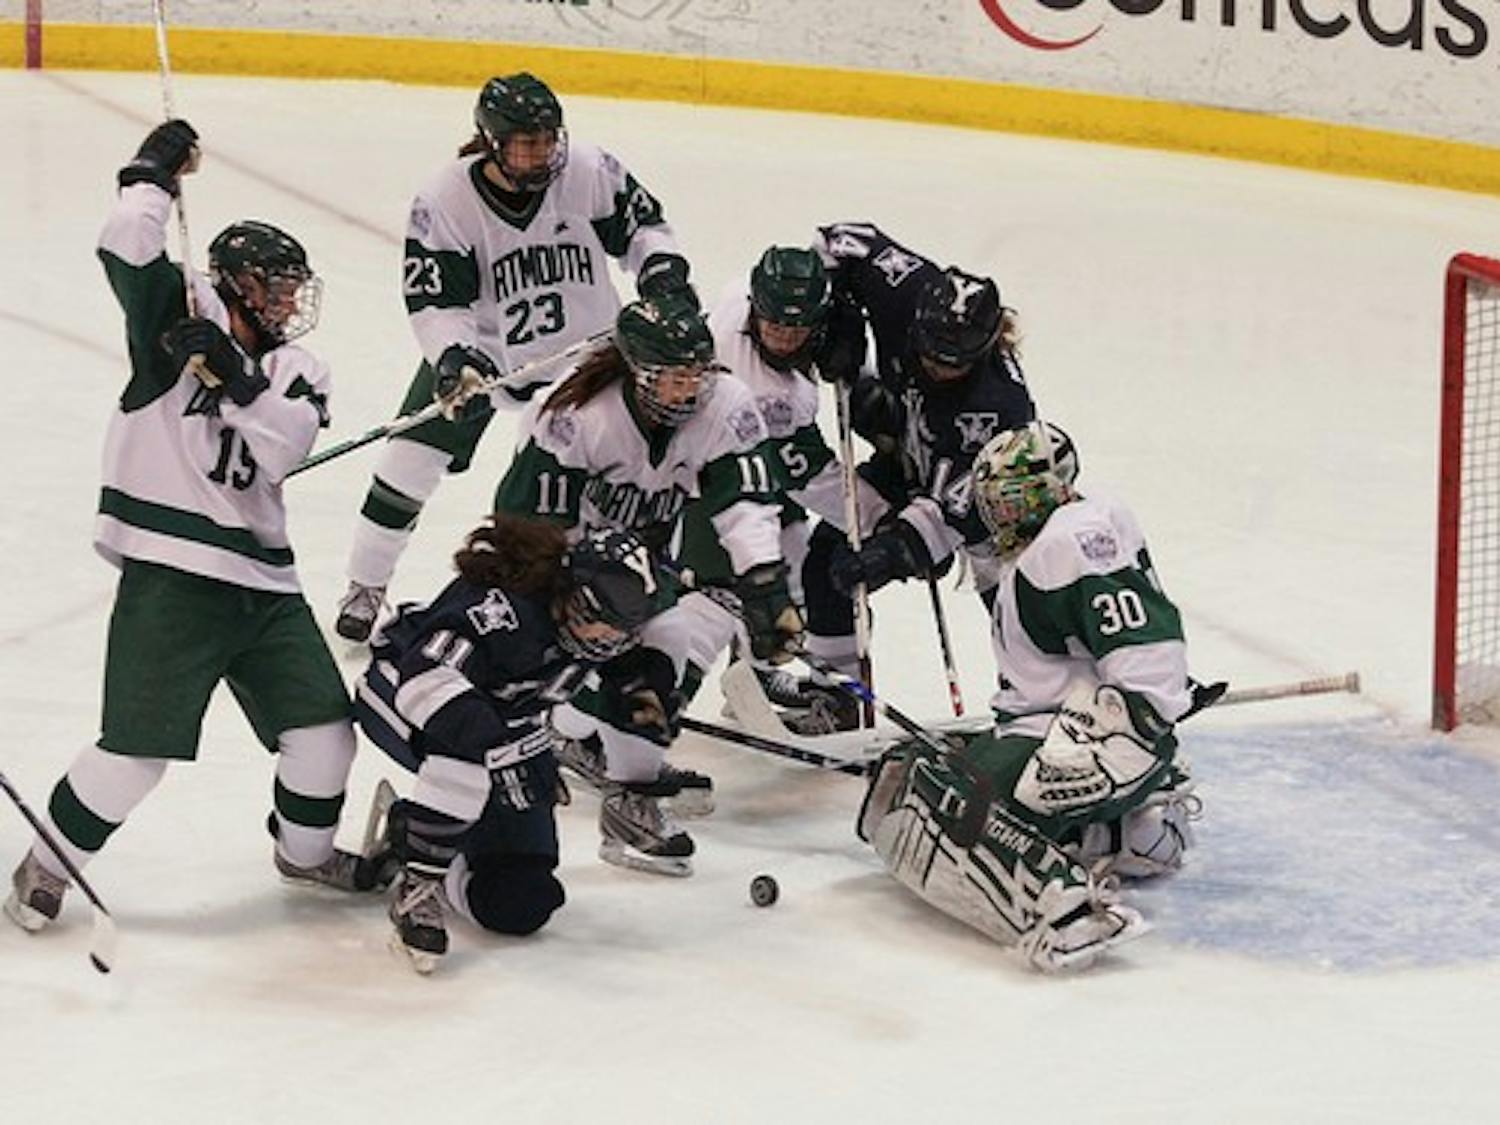 The women's hockey team extended its winning streak to four games with victories against Yale and Brown.